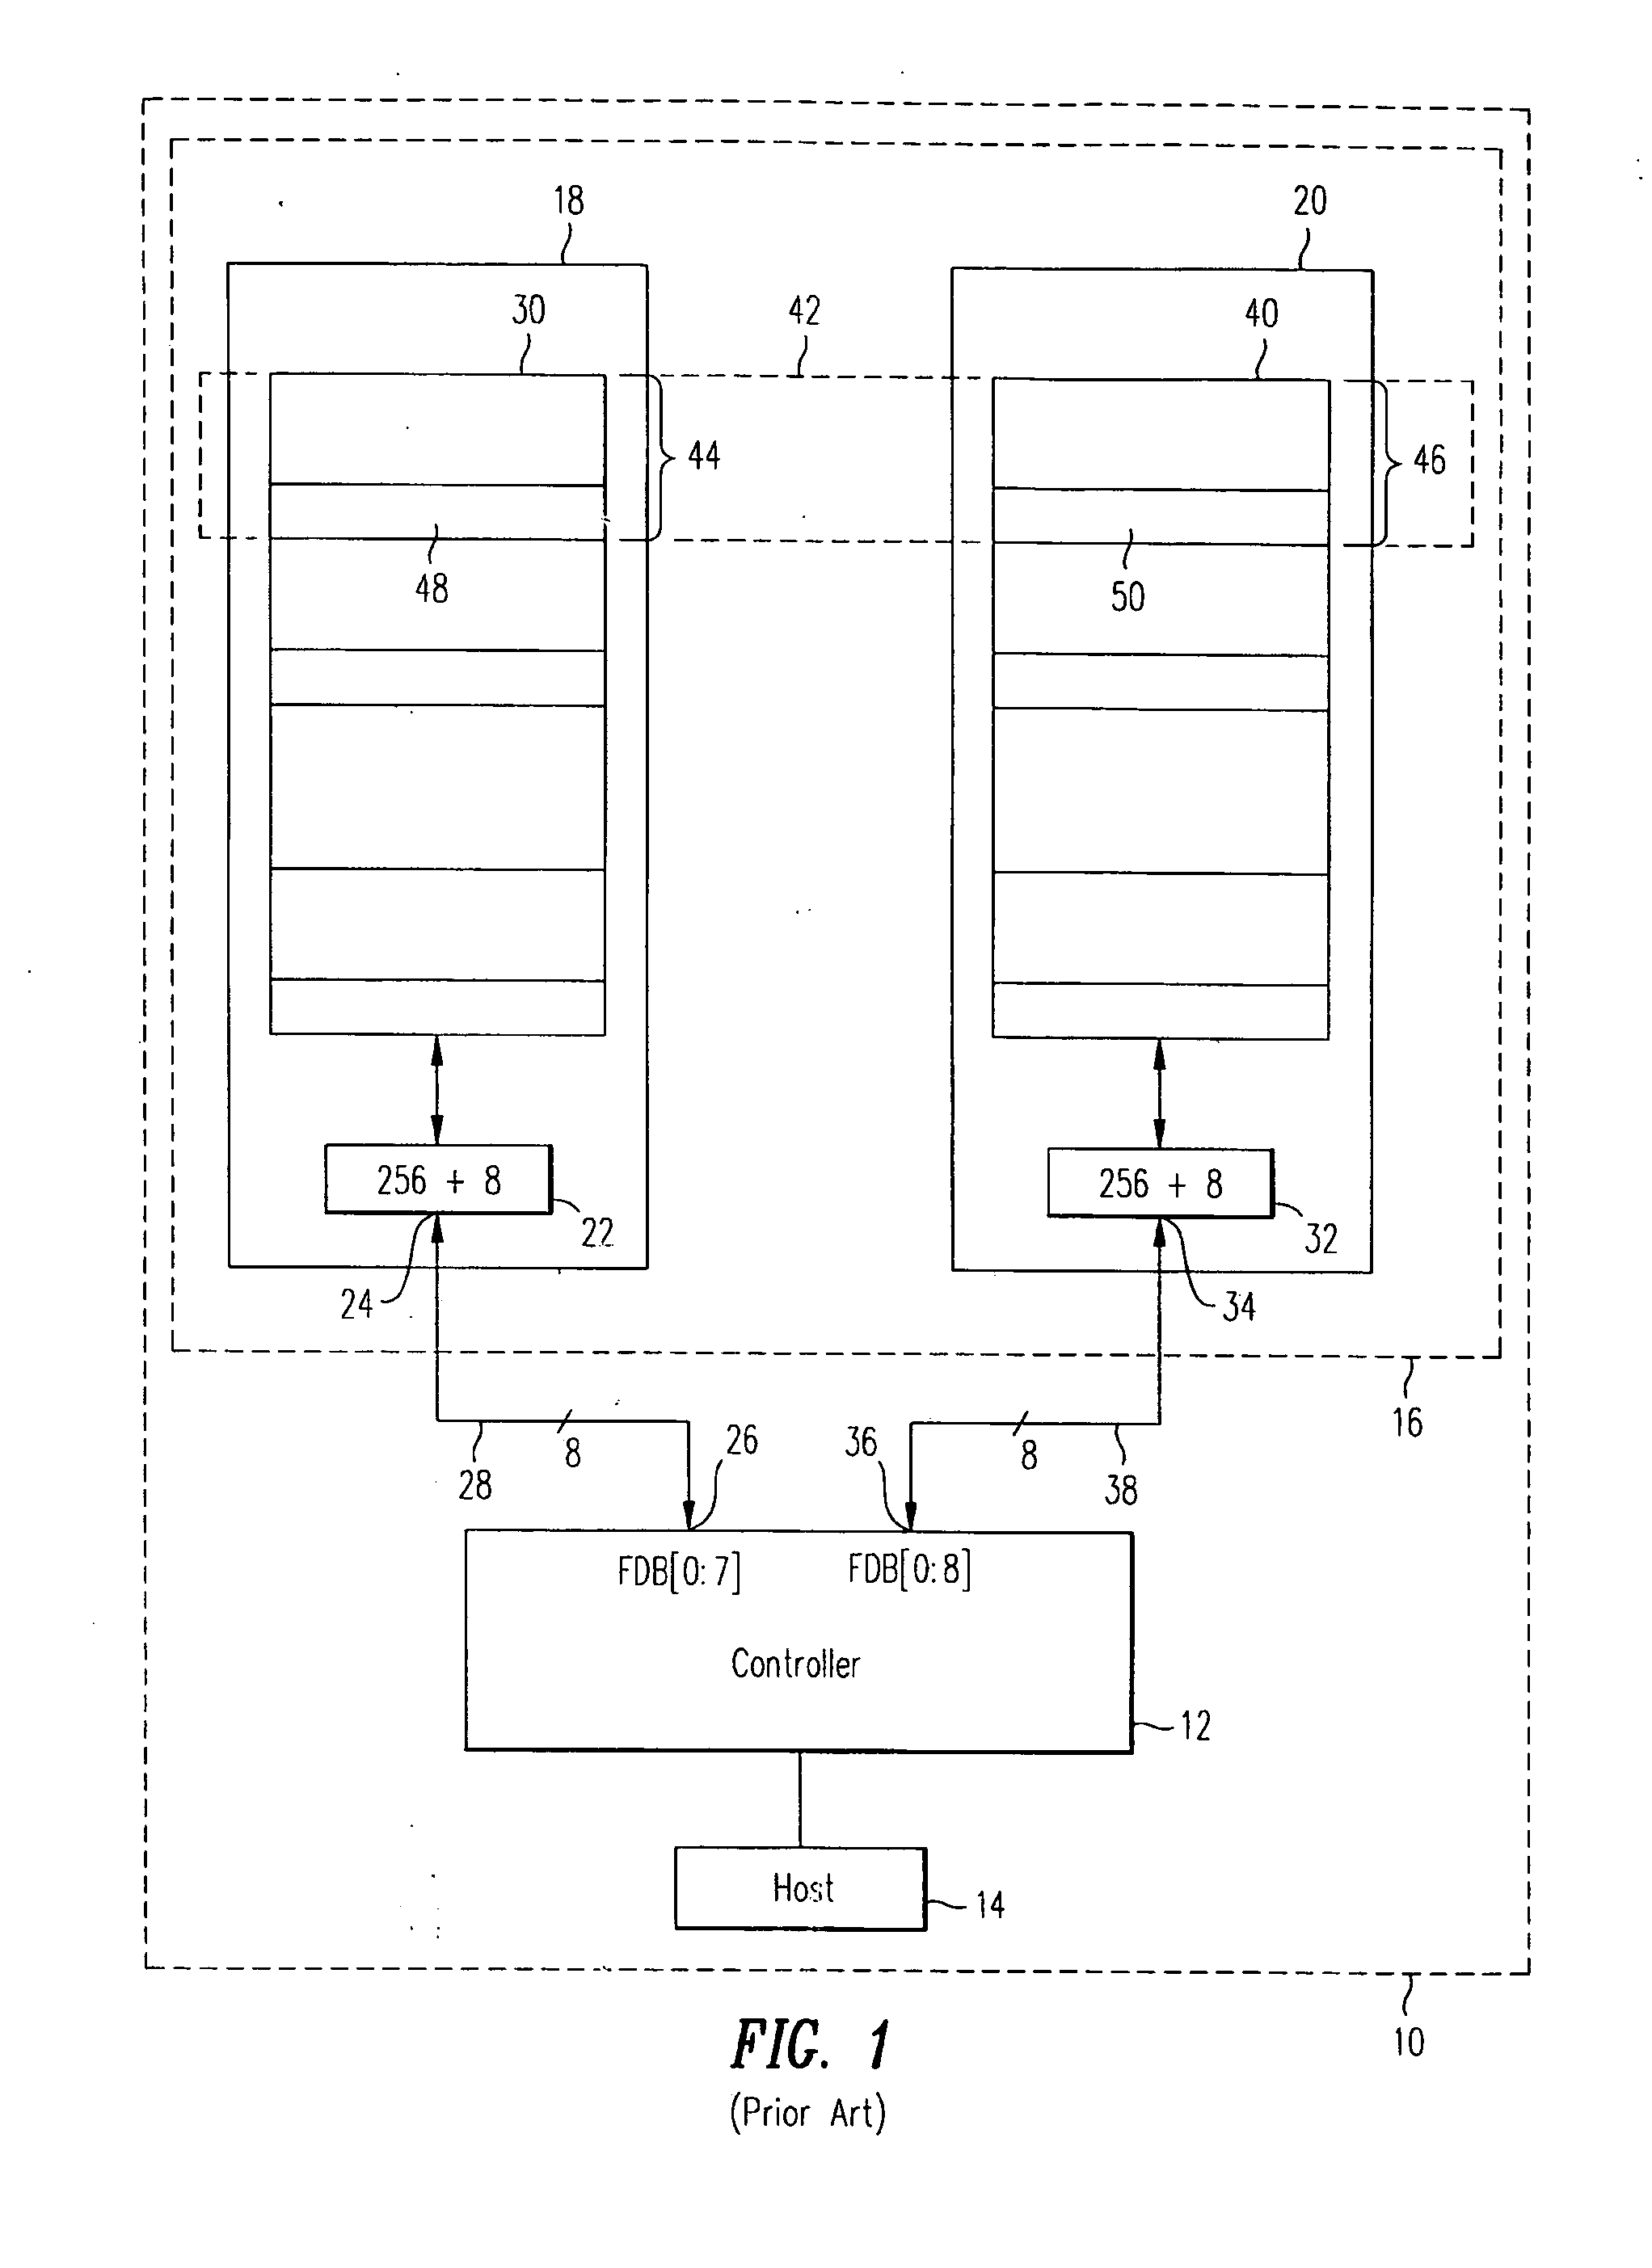 Increasing the memory performance of flash memory devices by writing sectors simultaneously to multiple flash memory devices